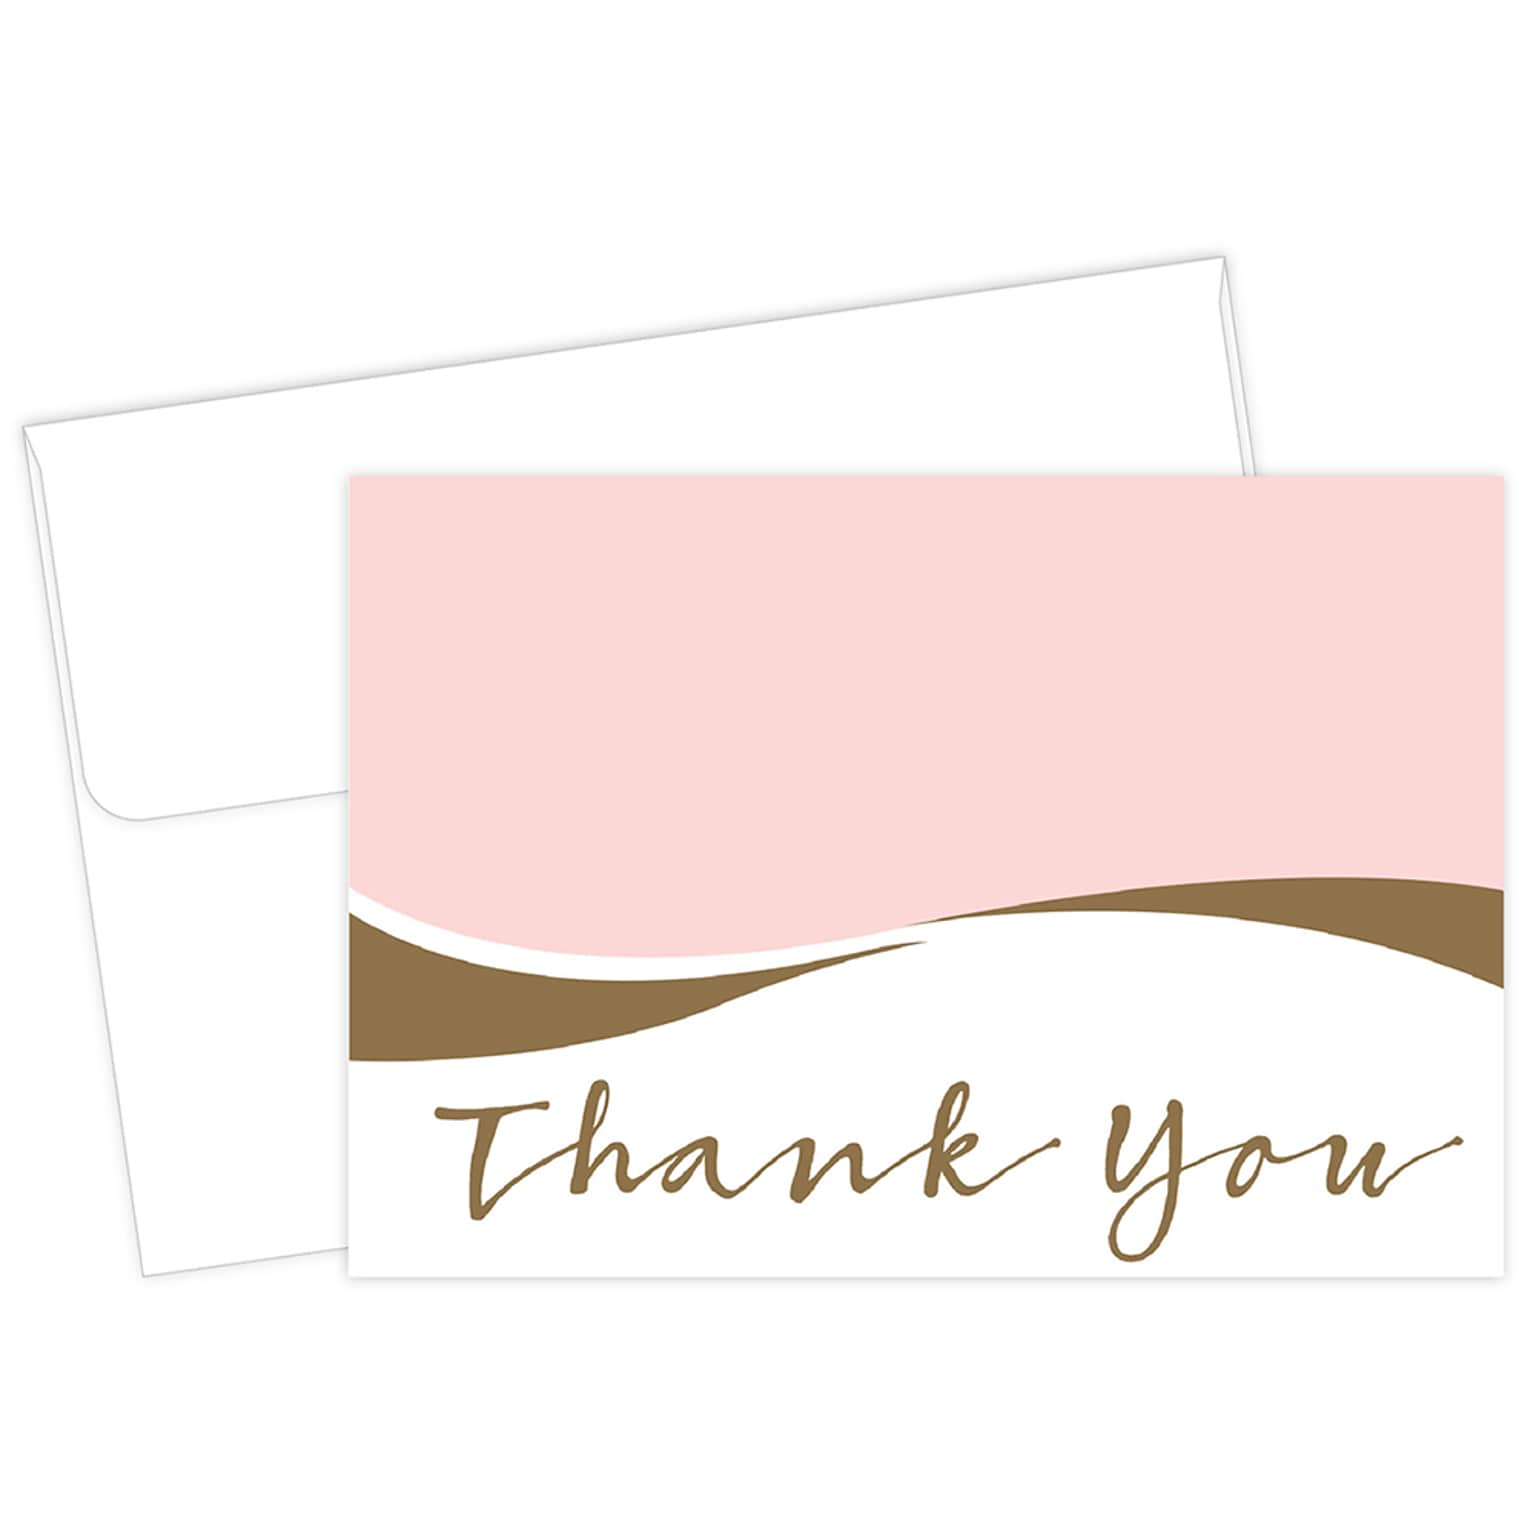 Masterpiece Studios Great Papers!® Pink Caress with Gold Metallic Foil Thank You Note Card, 4.875H x 3.35W, 50 count (2017056)